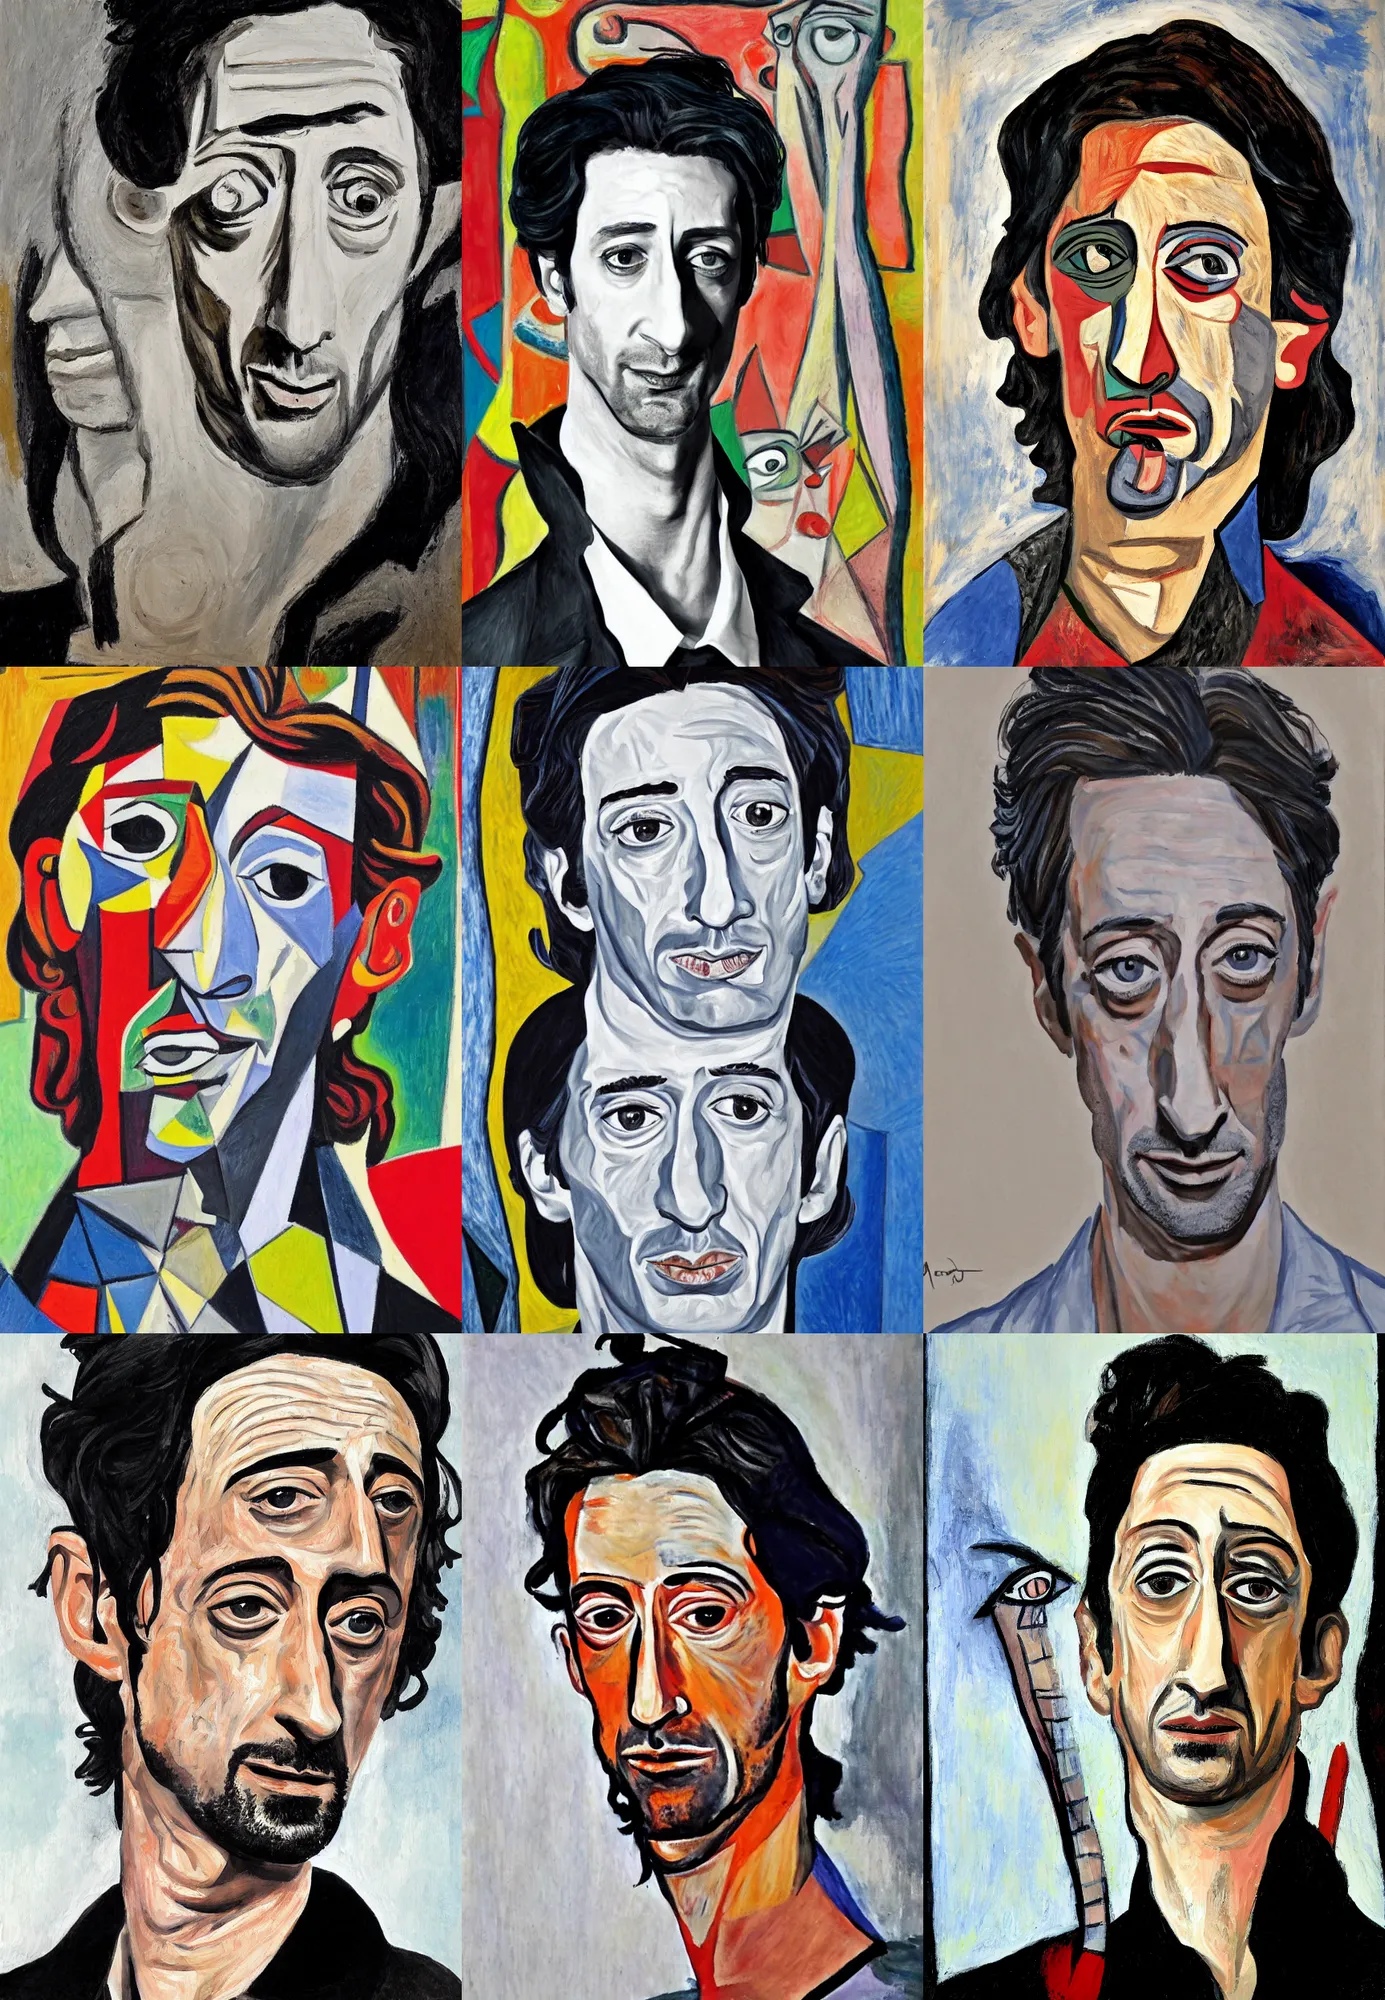 Prompt: painting adrien brody by picasso